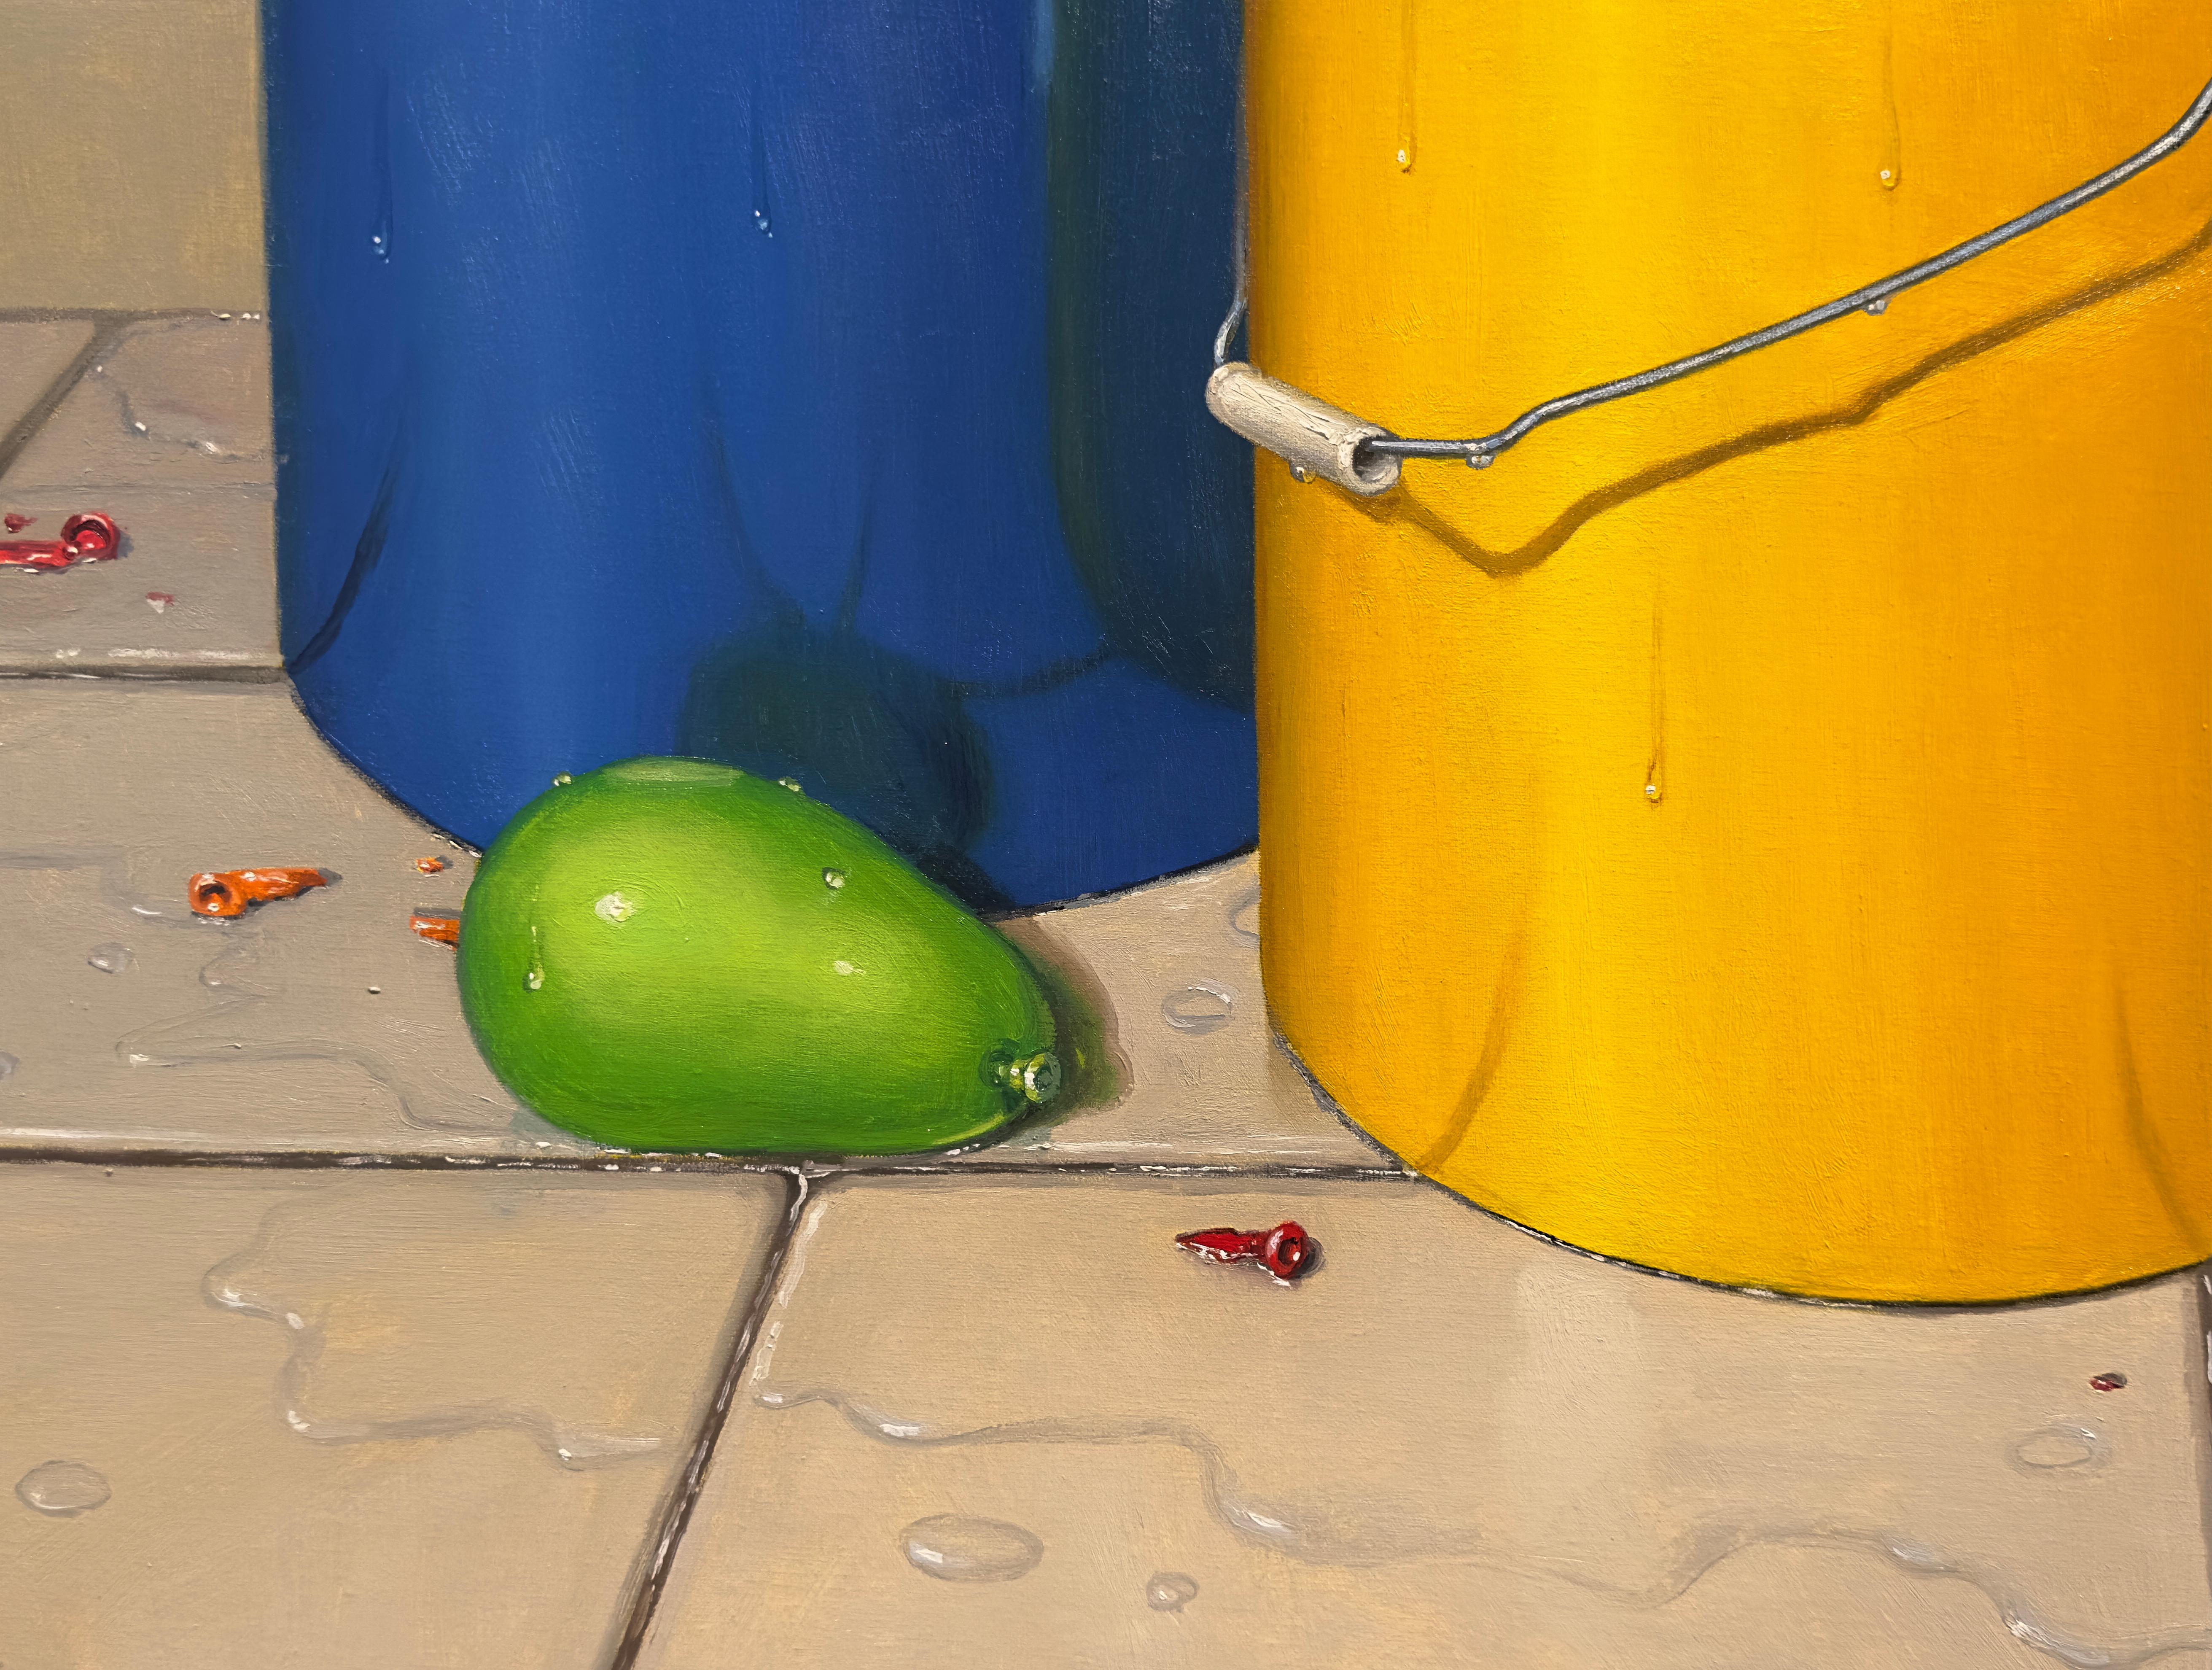 READY - Realism / Oil Painting / Contemporary / Humor / Balloons 4